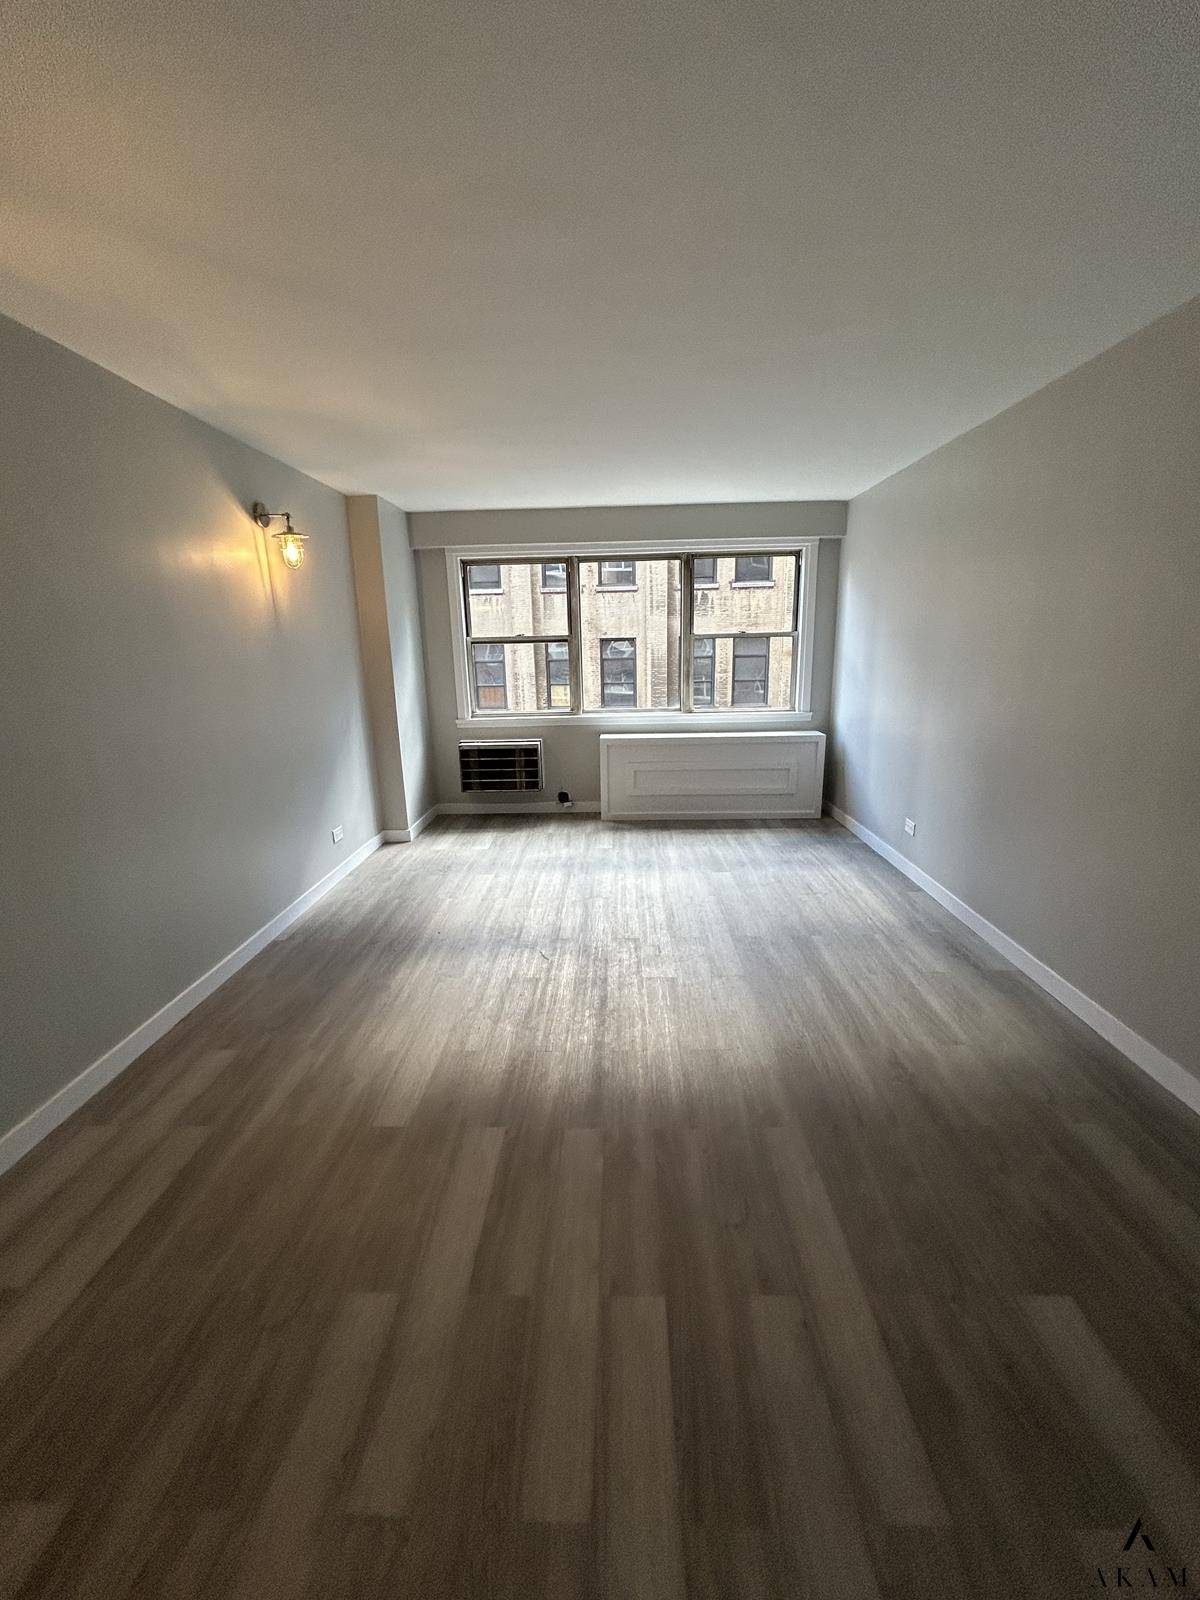 SPONSOR UNIT NO BOARD APPROVALJust Renovated Sponsor Unit No Board Approval Hudson Yards Rooftop DeckTotally renovated studio apartment at Convention Overlook in the new hip Hudson Yards area.